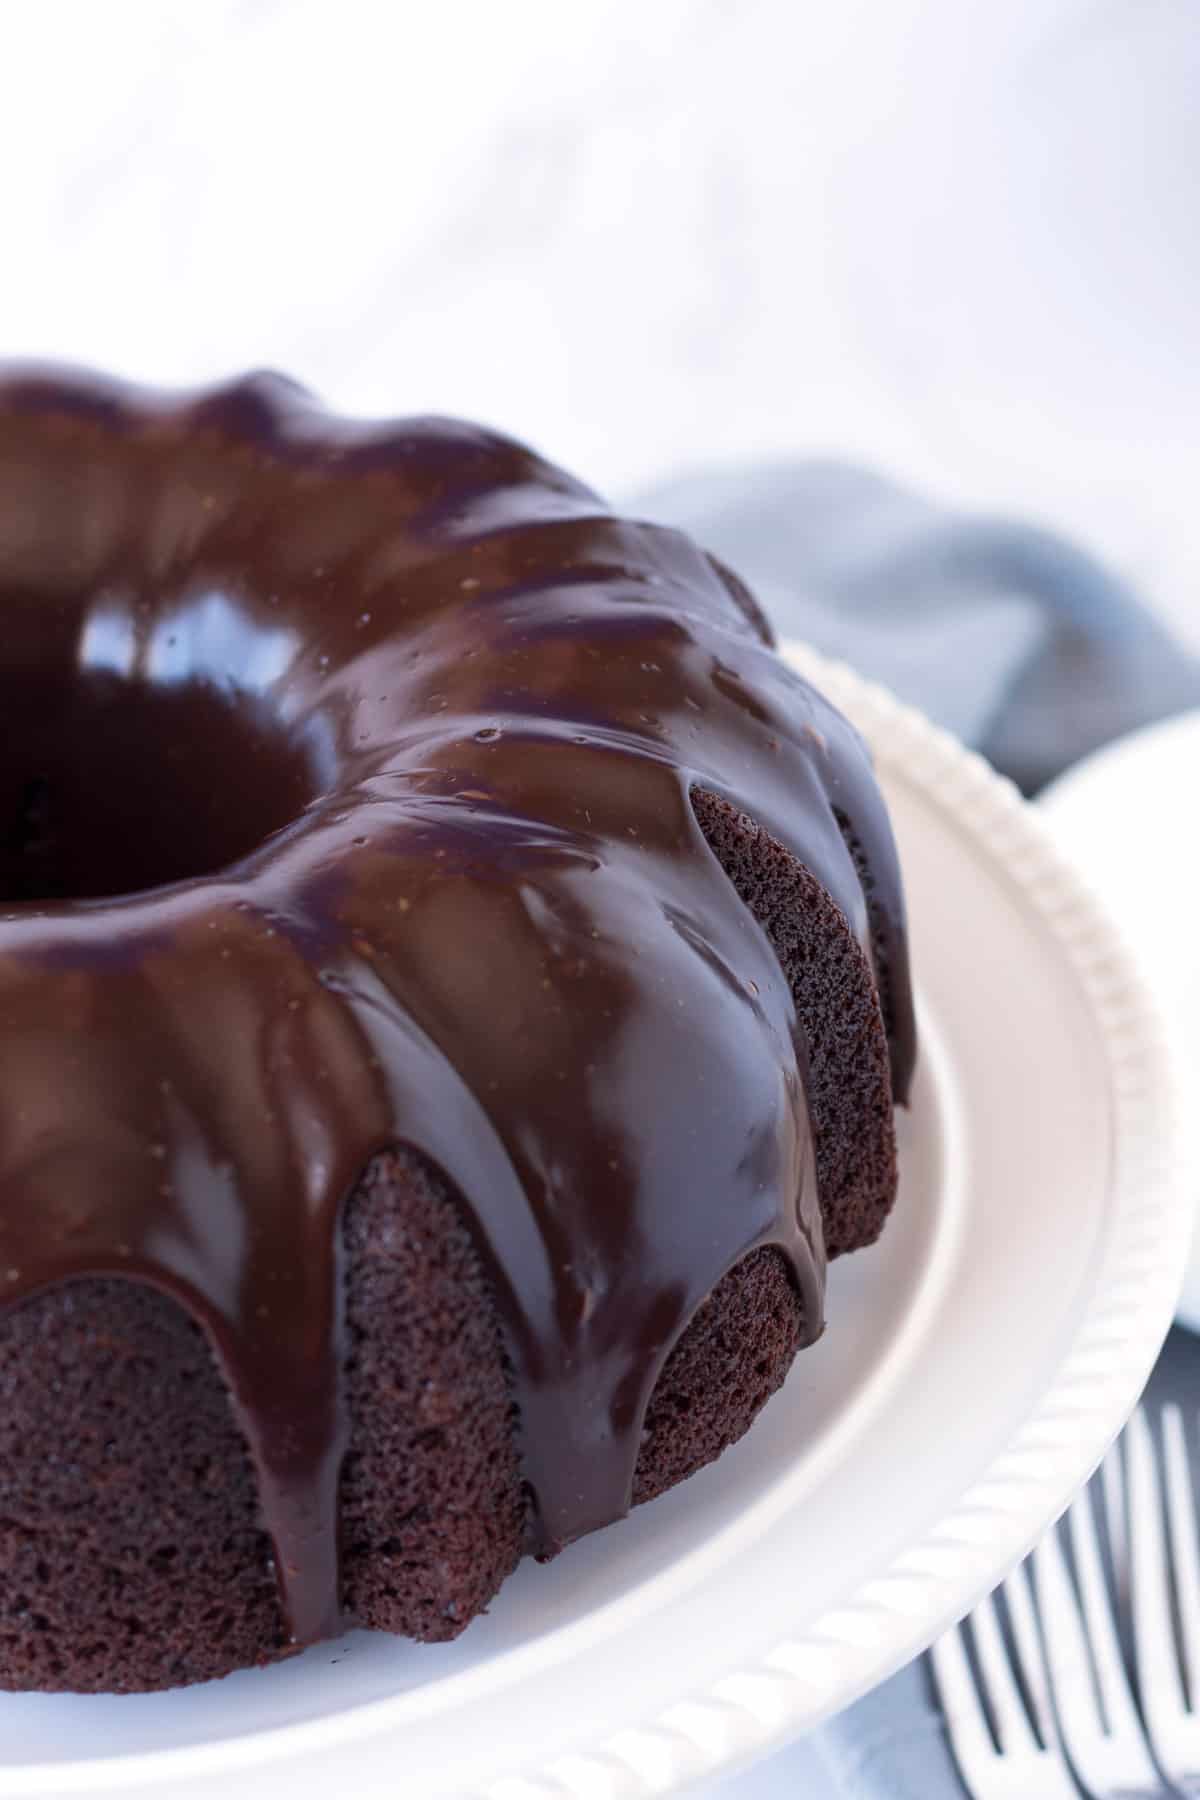 Chocolate bundt cake with chocolate glaze on a white cake stand with a light blue towel in the background.